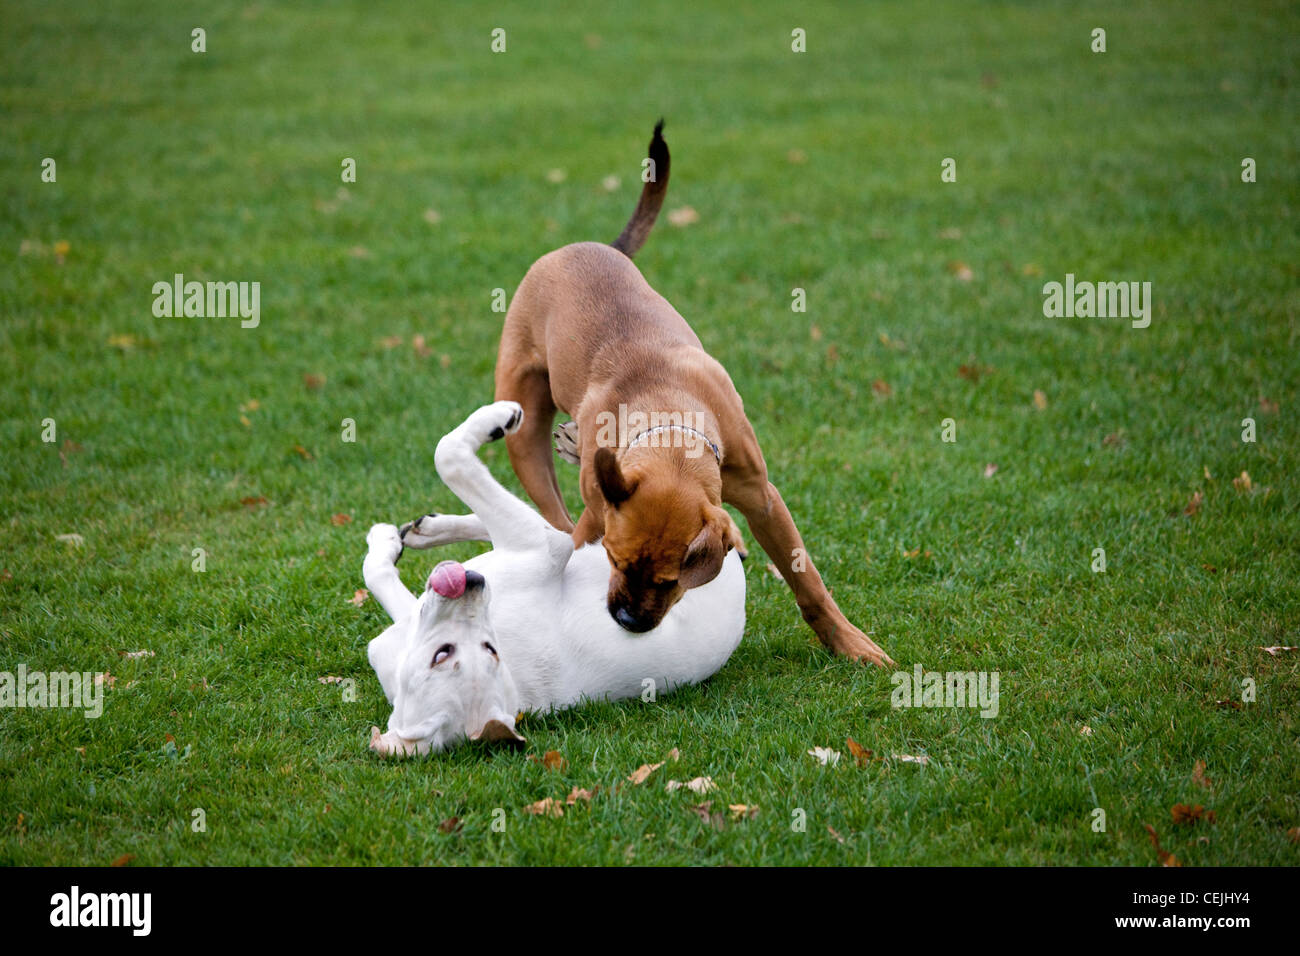 Young dogs (Canis lupus familiaris) having fun by playing, chasing and biting each other in garden Stock Photo